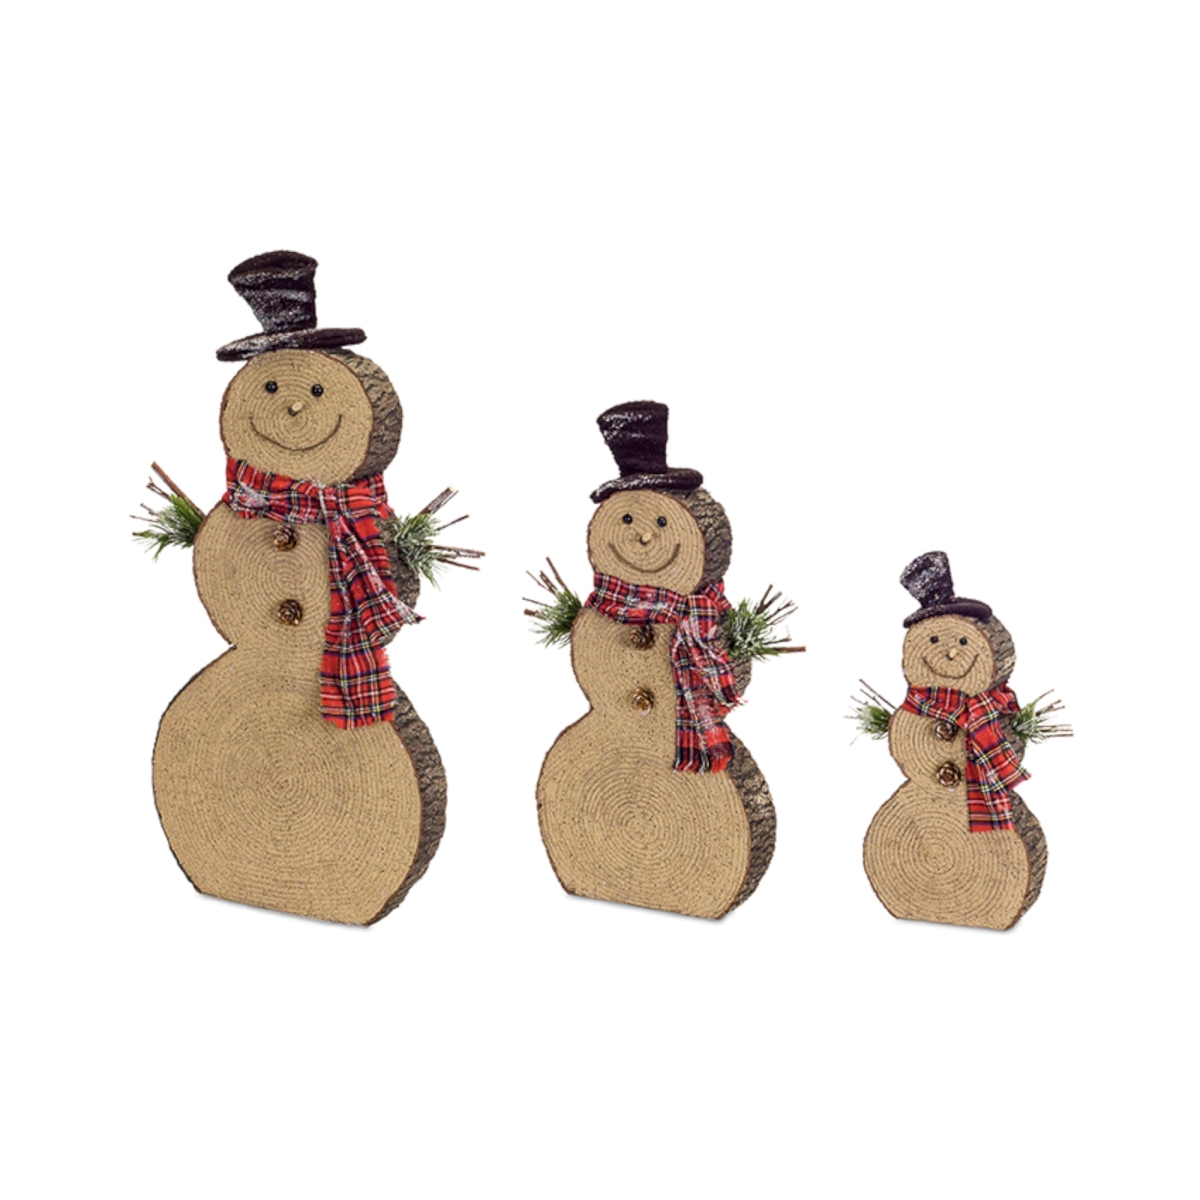 UPC 746427724623 product image for 72462DS 11.5 x 16 x 20.5 in. Foam Snowman, Brown & Red - Set of 3 | upcitemdb.com